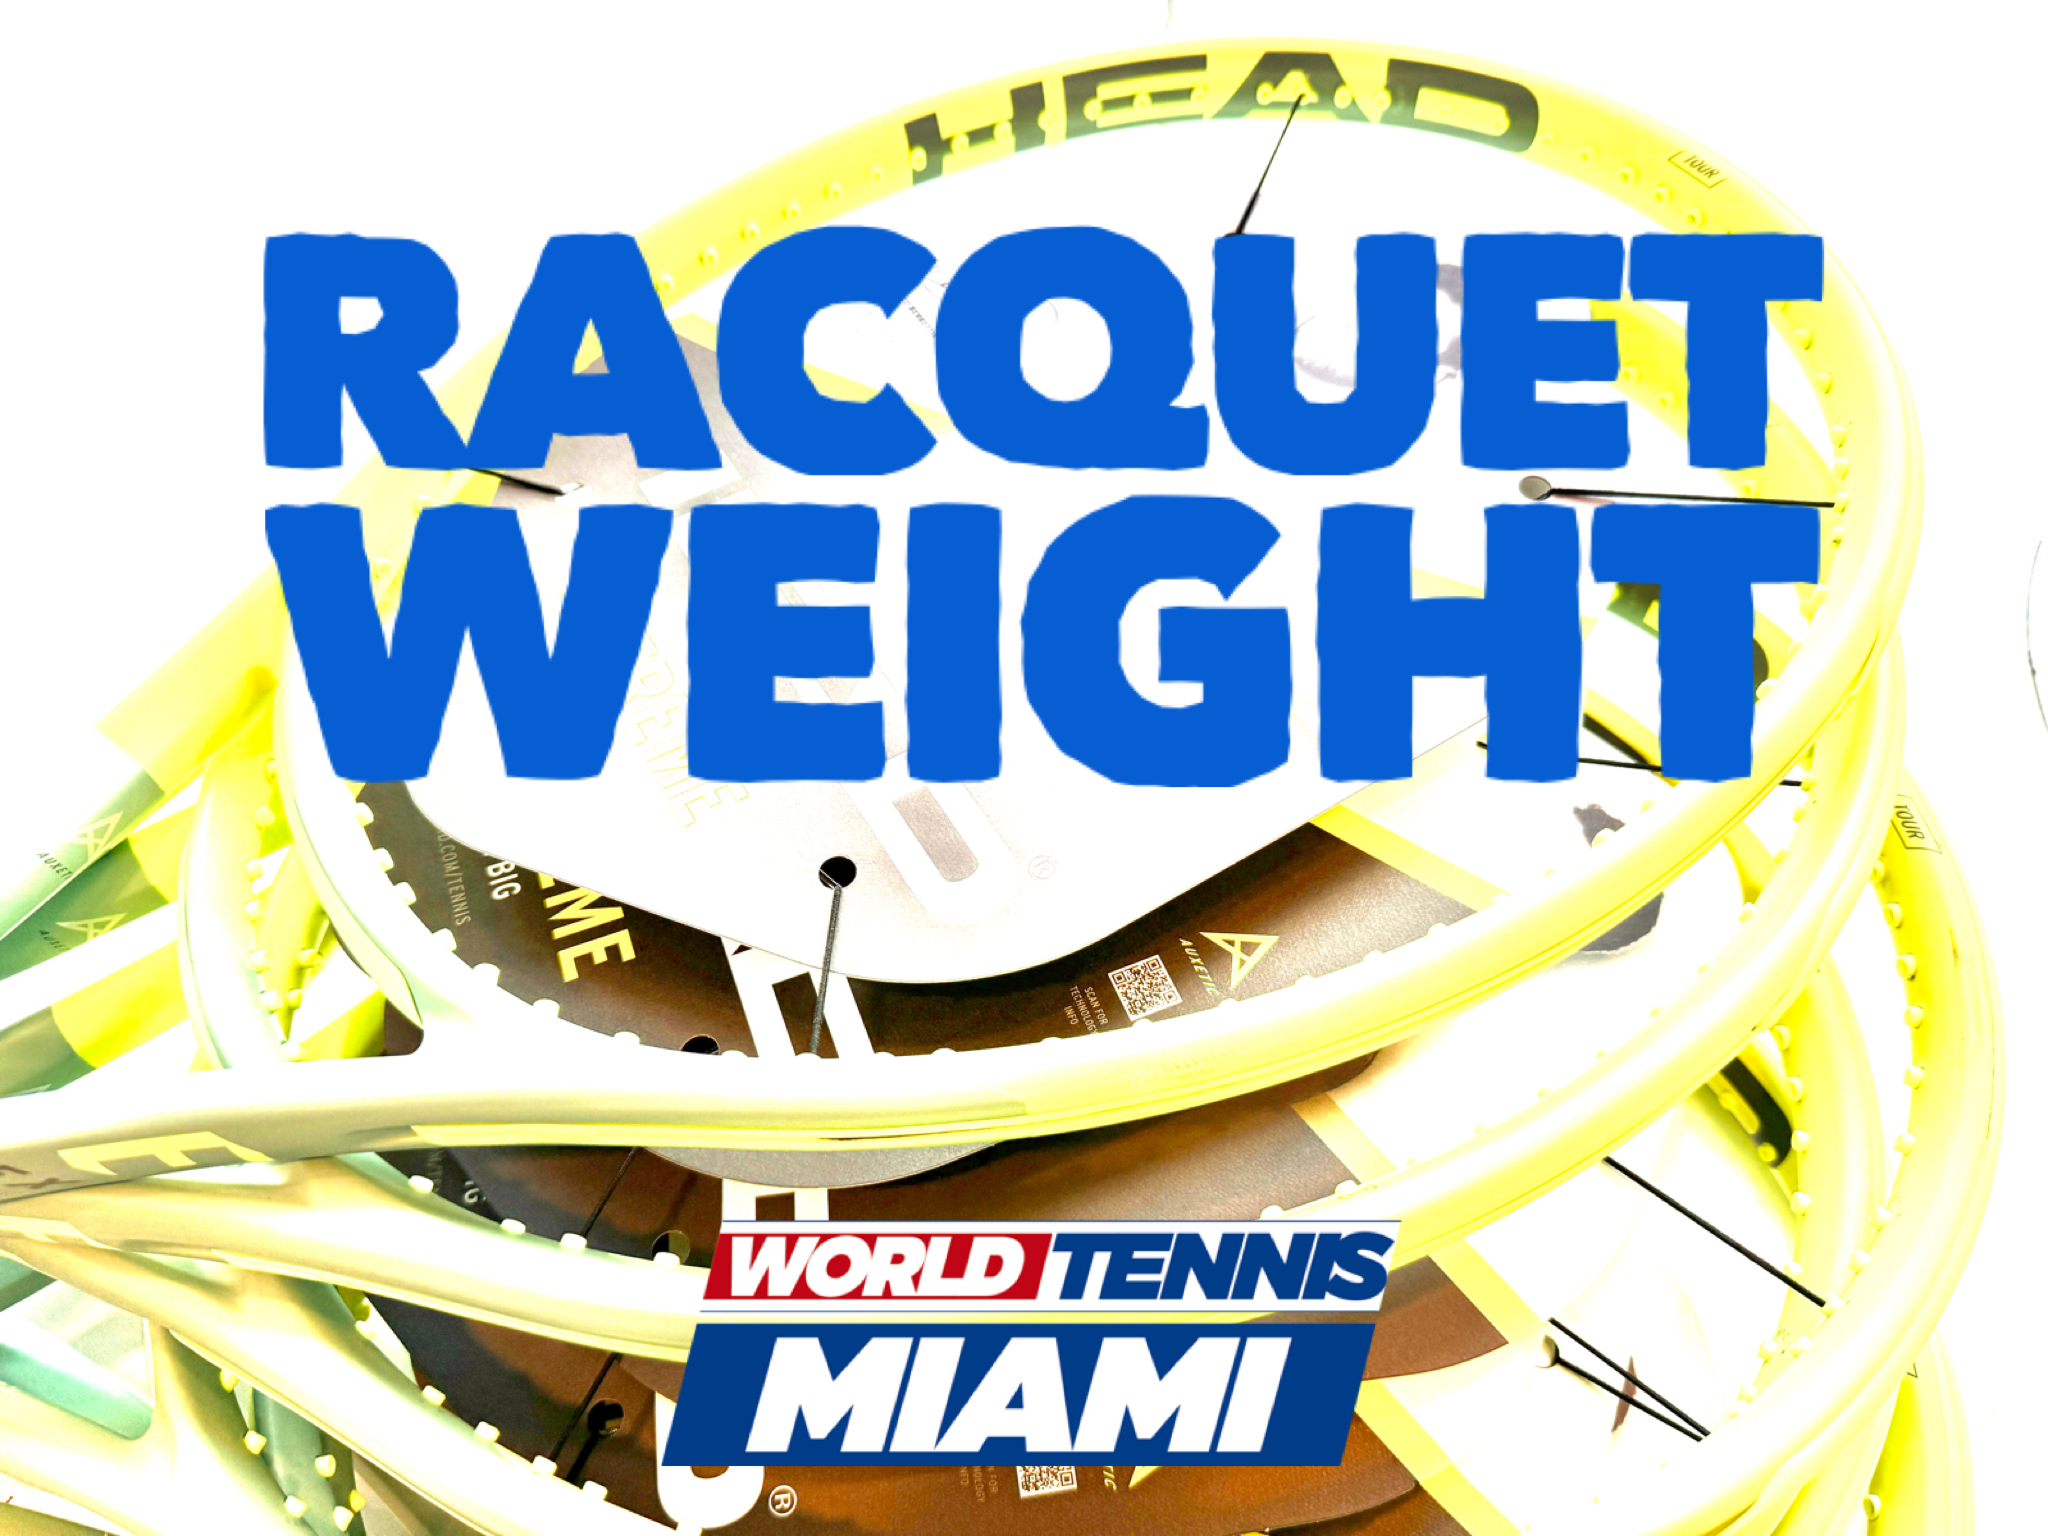 How to choose your tennis racquet: understanding the WEIGHT of the racquet